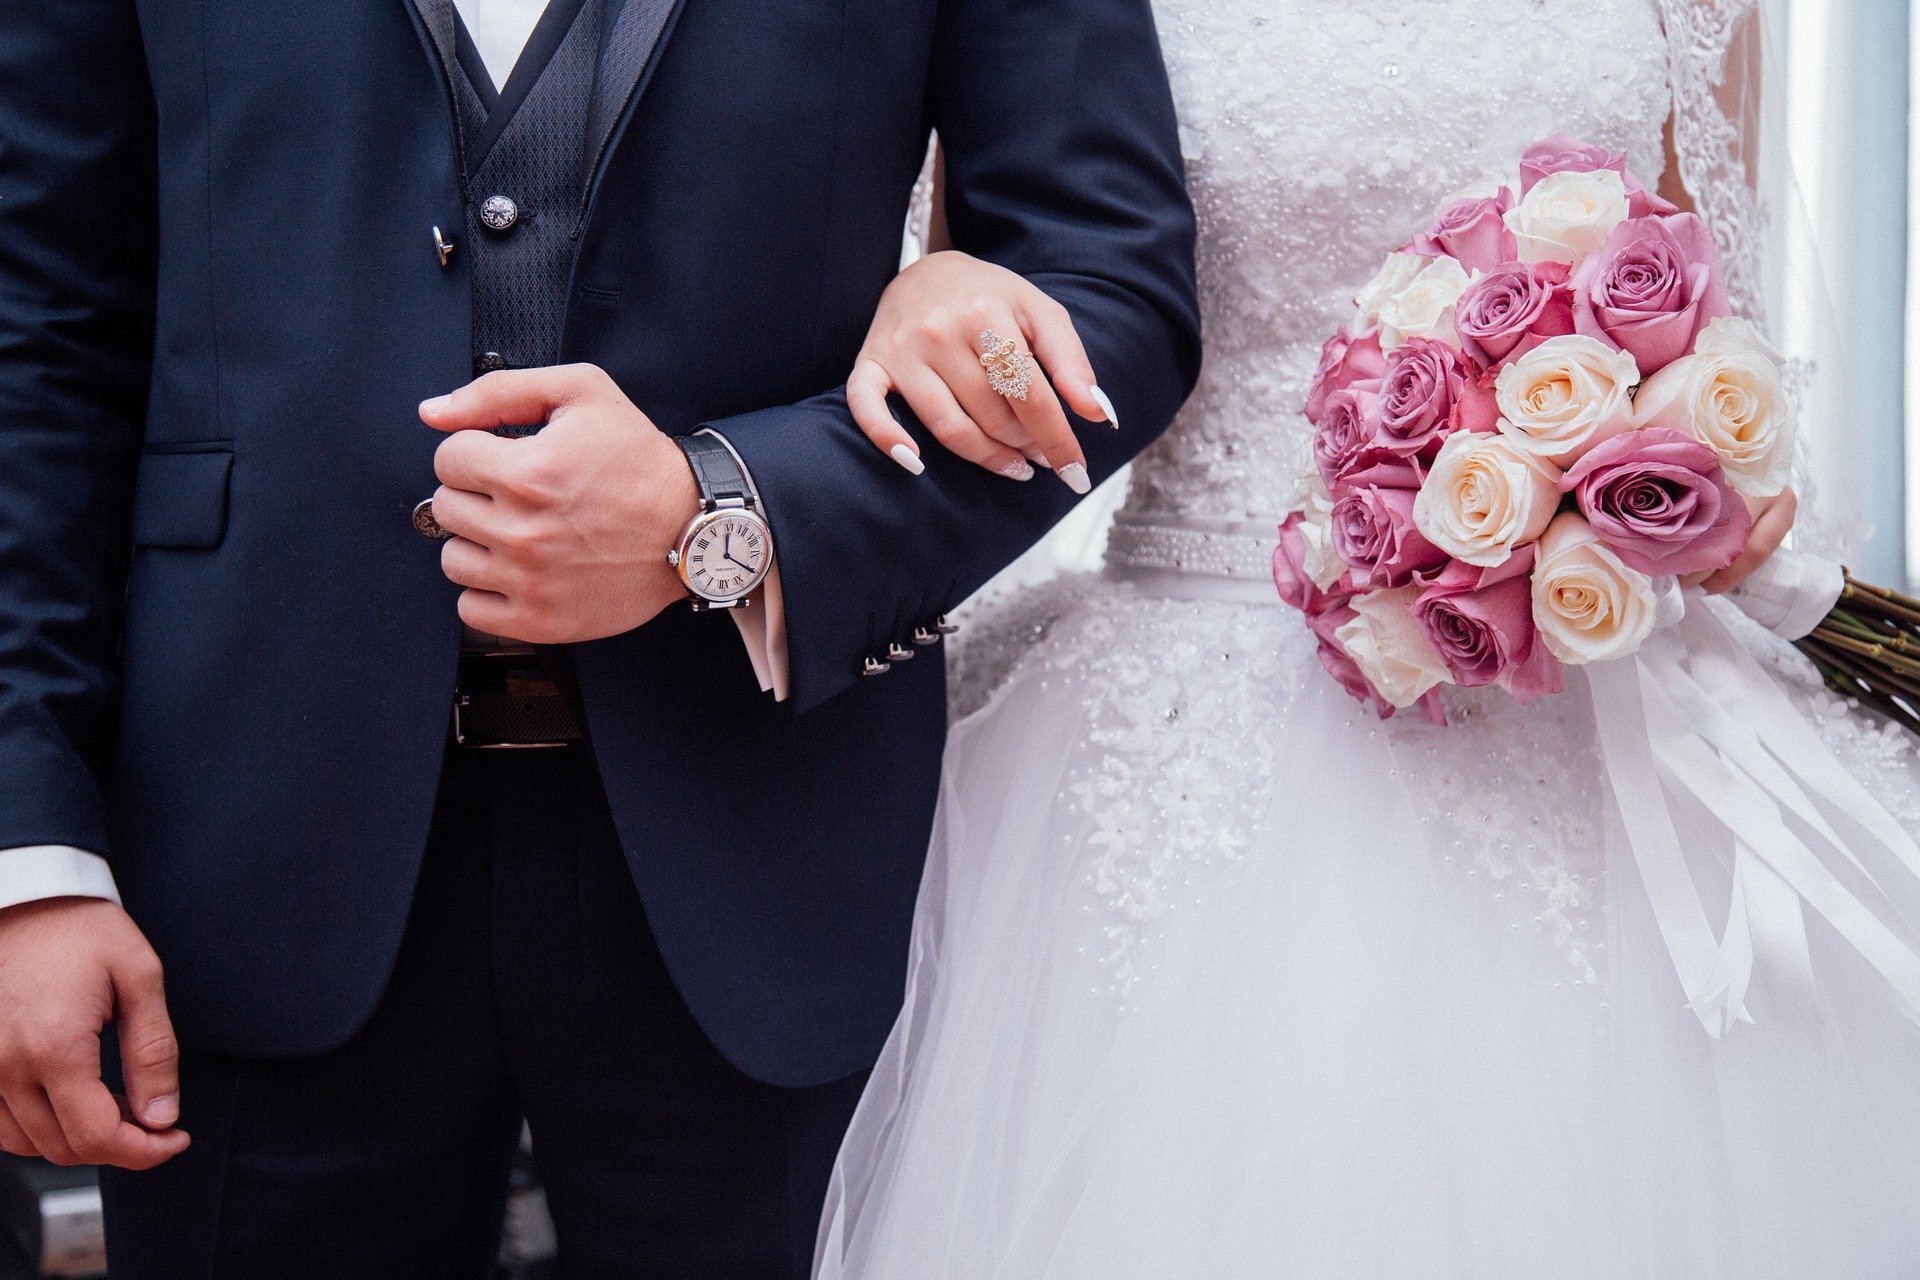 New study challenges common perceptions of Victorian register office weddings